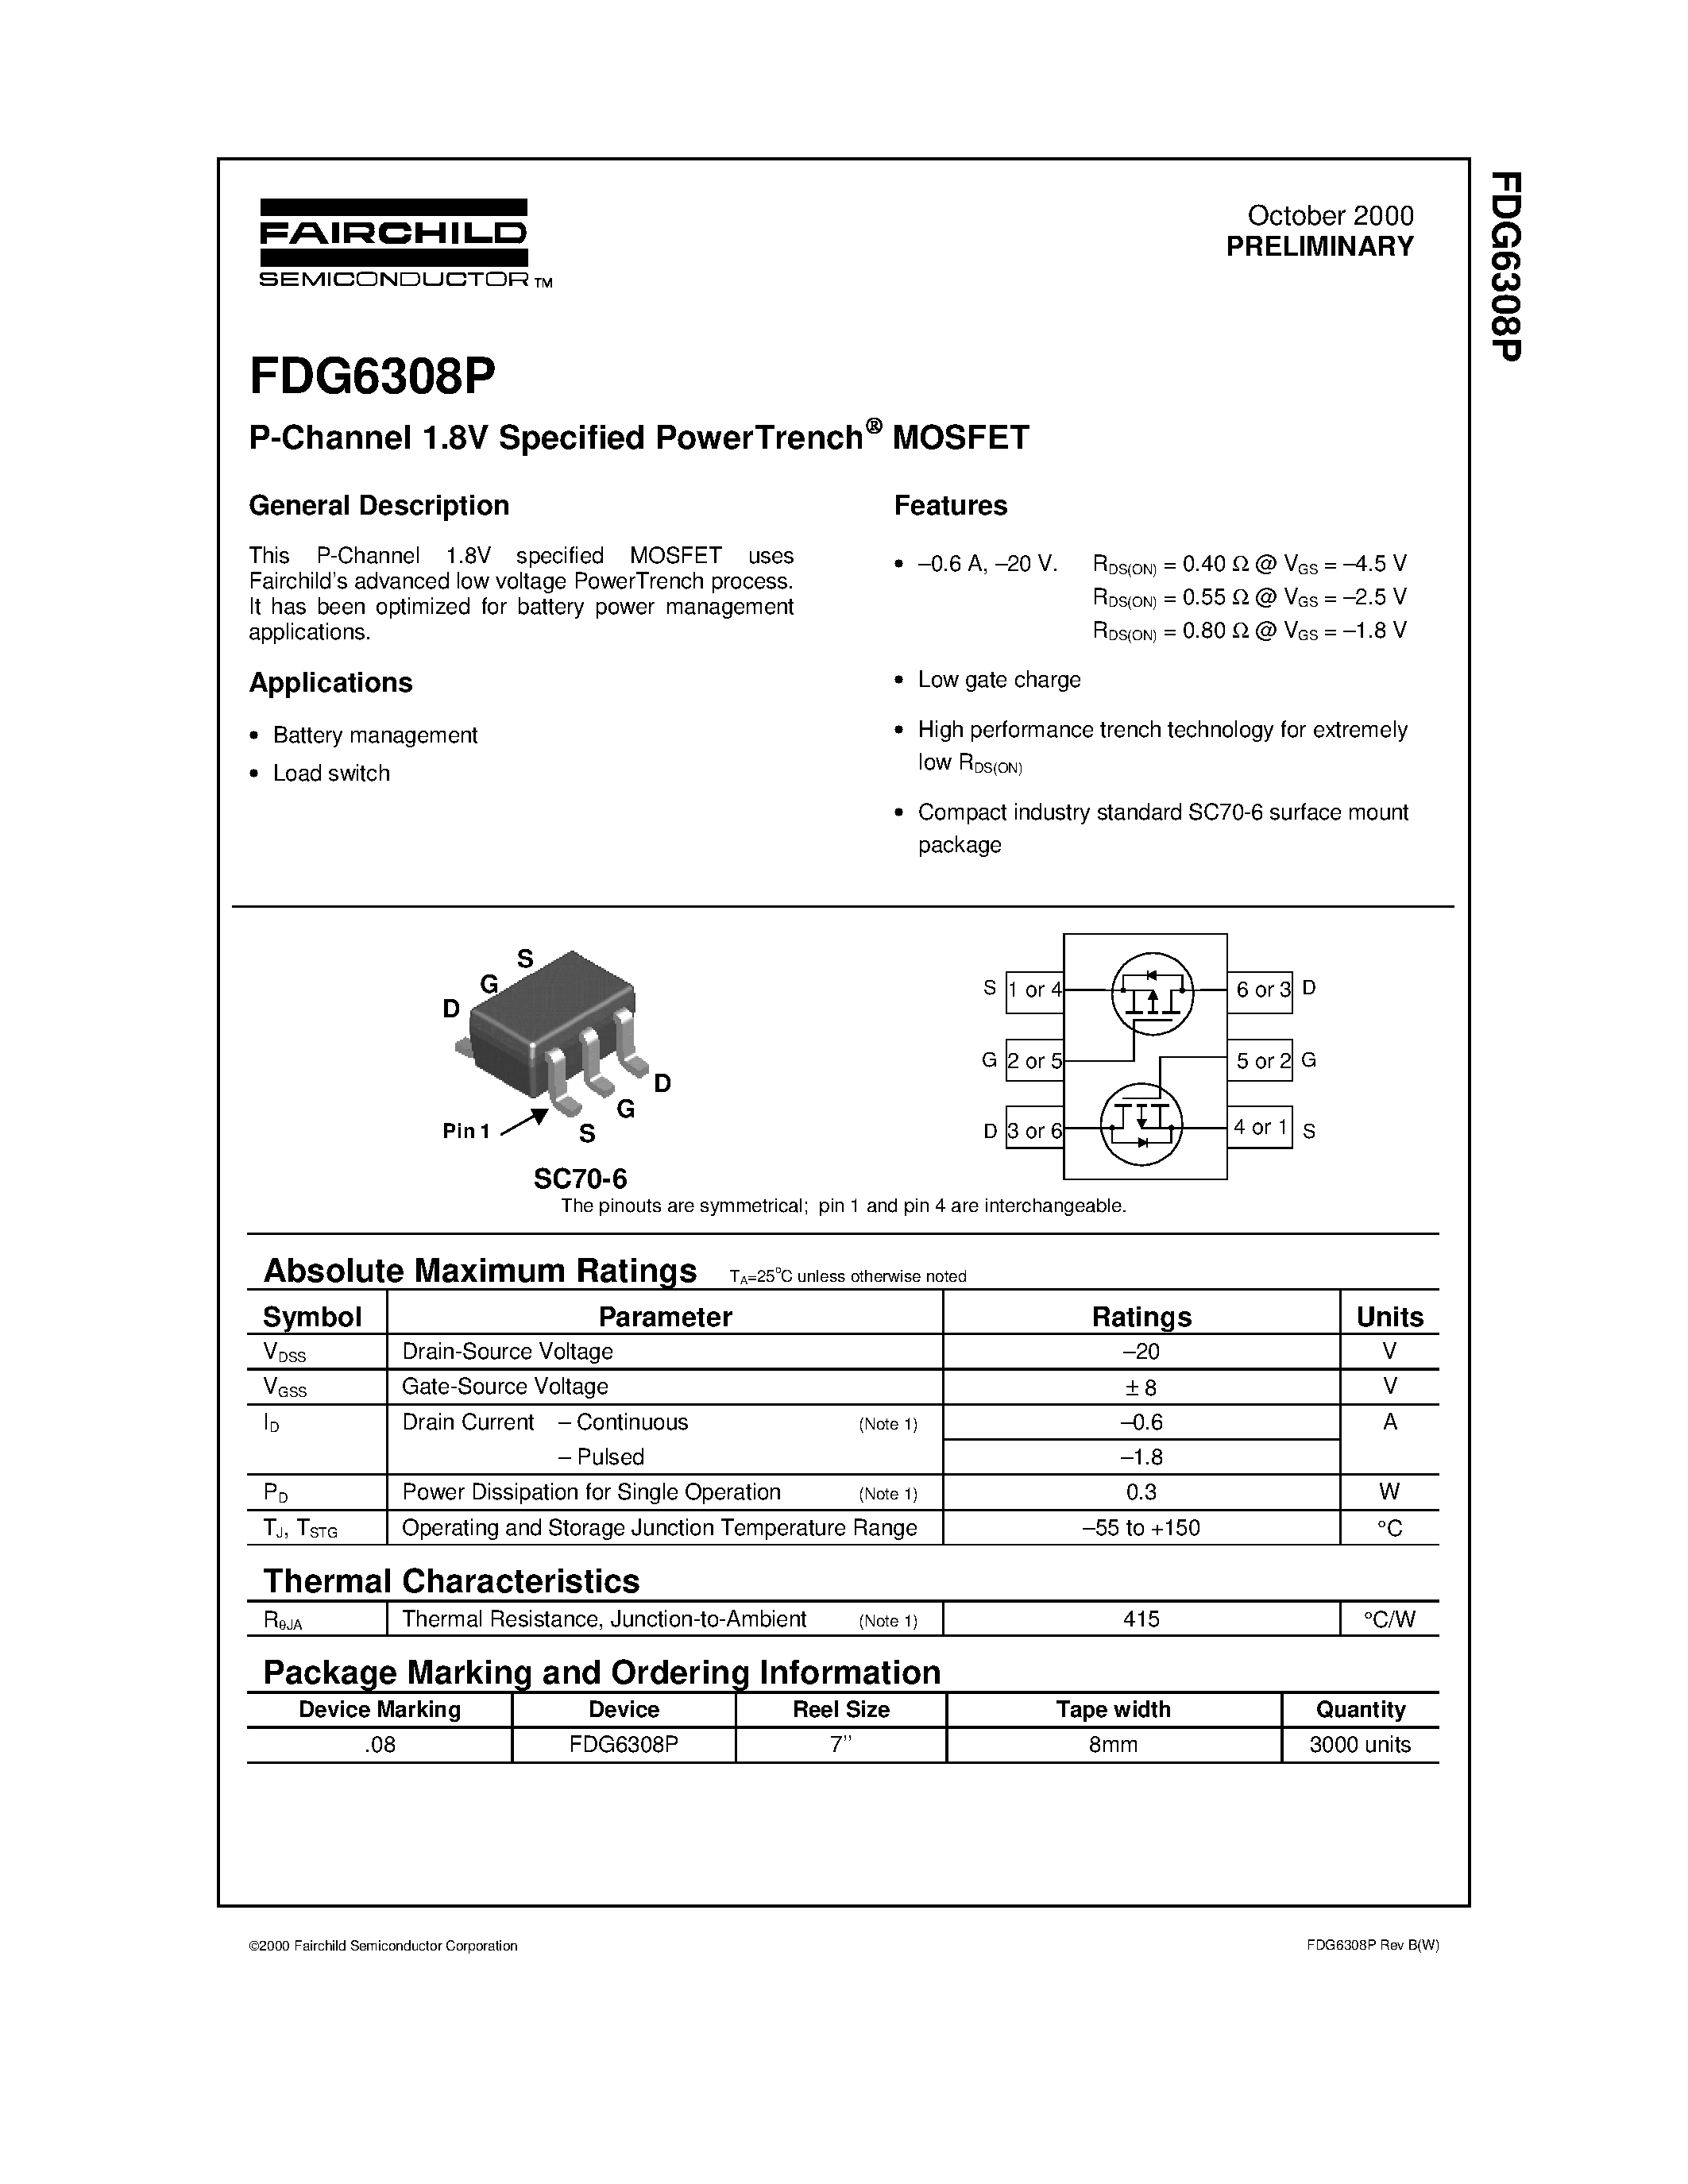 Datasheet FDG6308 - P-Channel 1.8V Specified PowerTrench MOSFET page 1